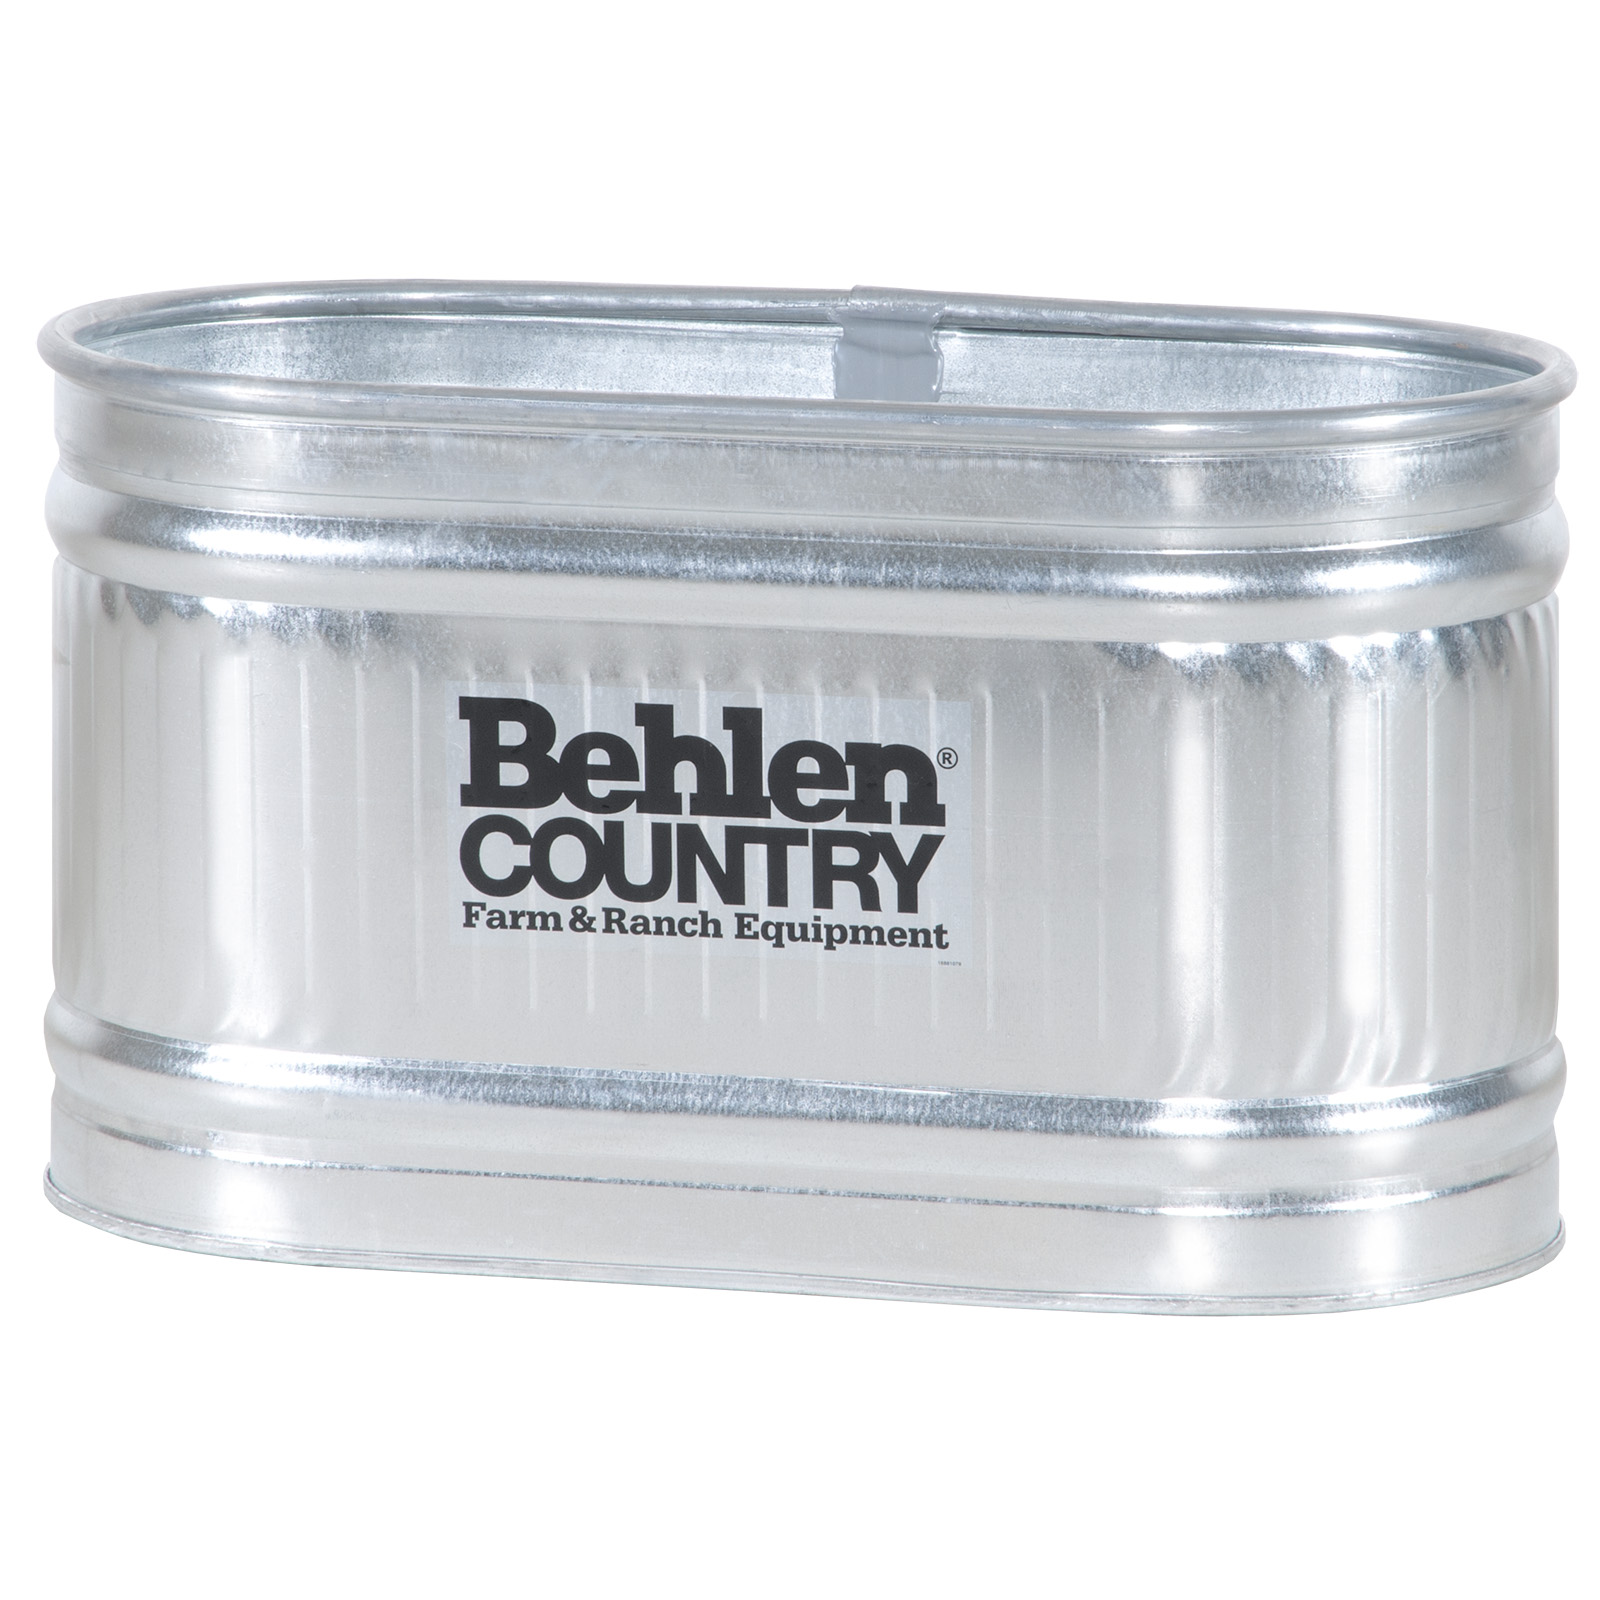 Behlen Country 50130218K 2 x 1 x 6 Round-End Galvanized Steel Stock Tank Nested Bundle Approximately 80 Gallon Pack of 2 Tanks 